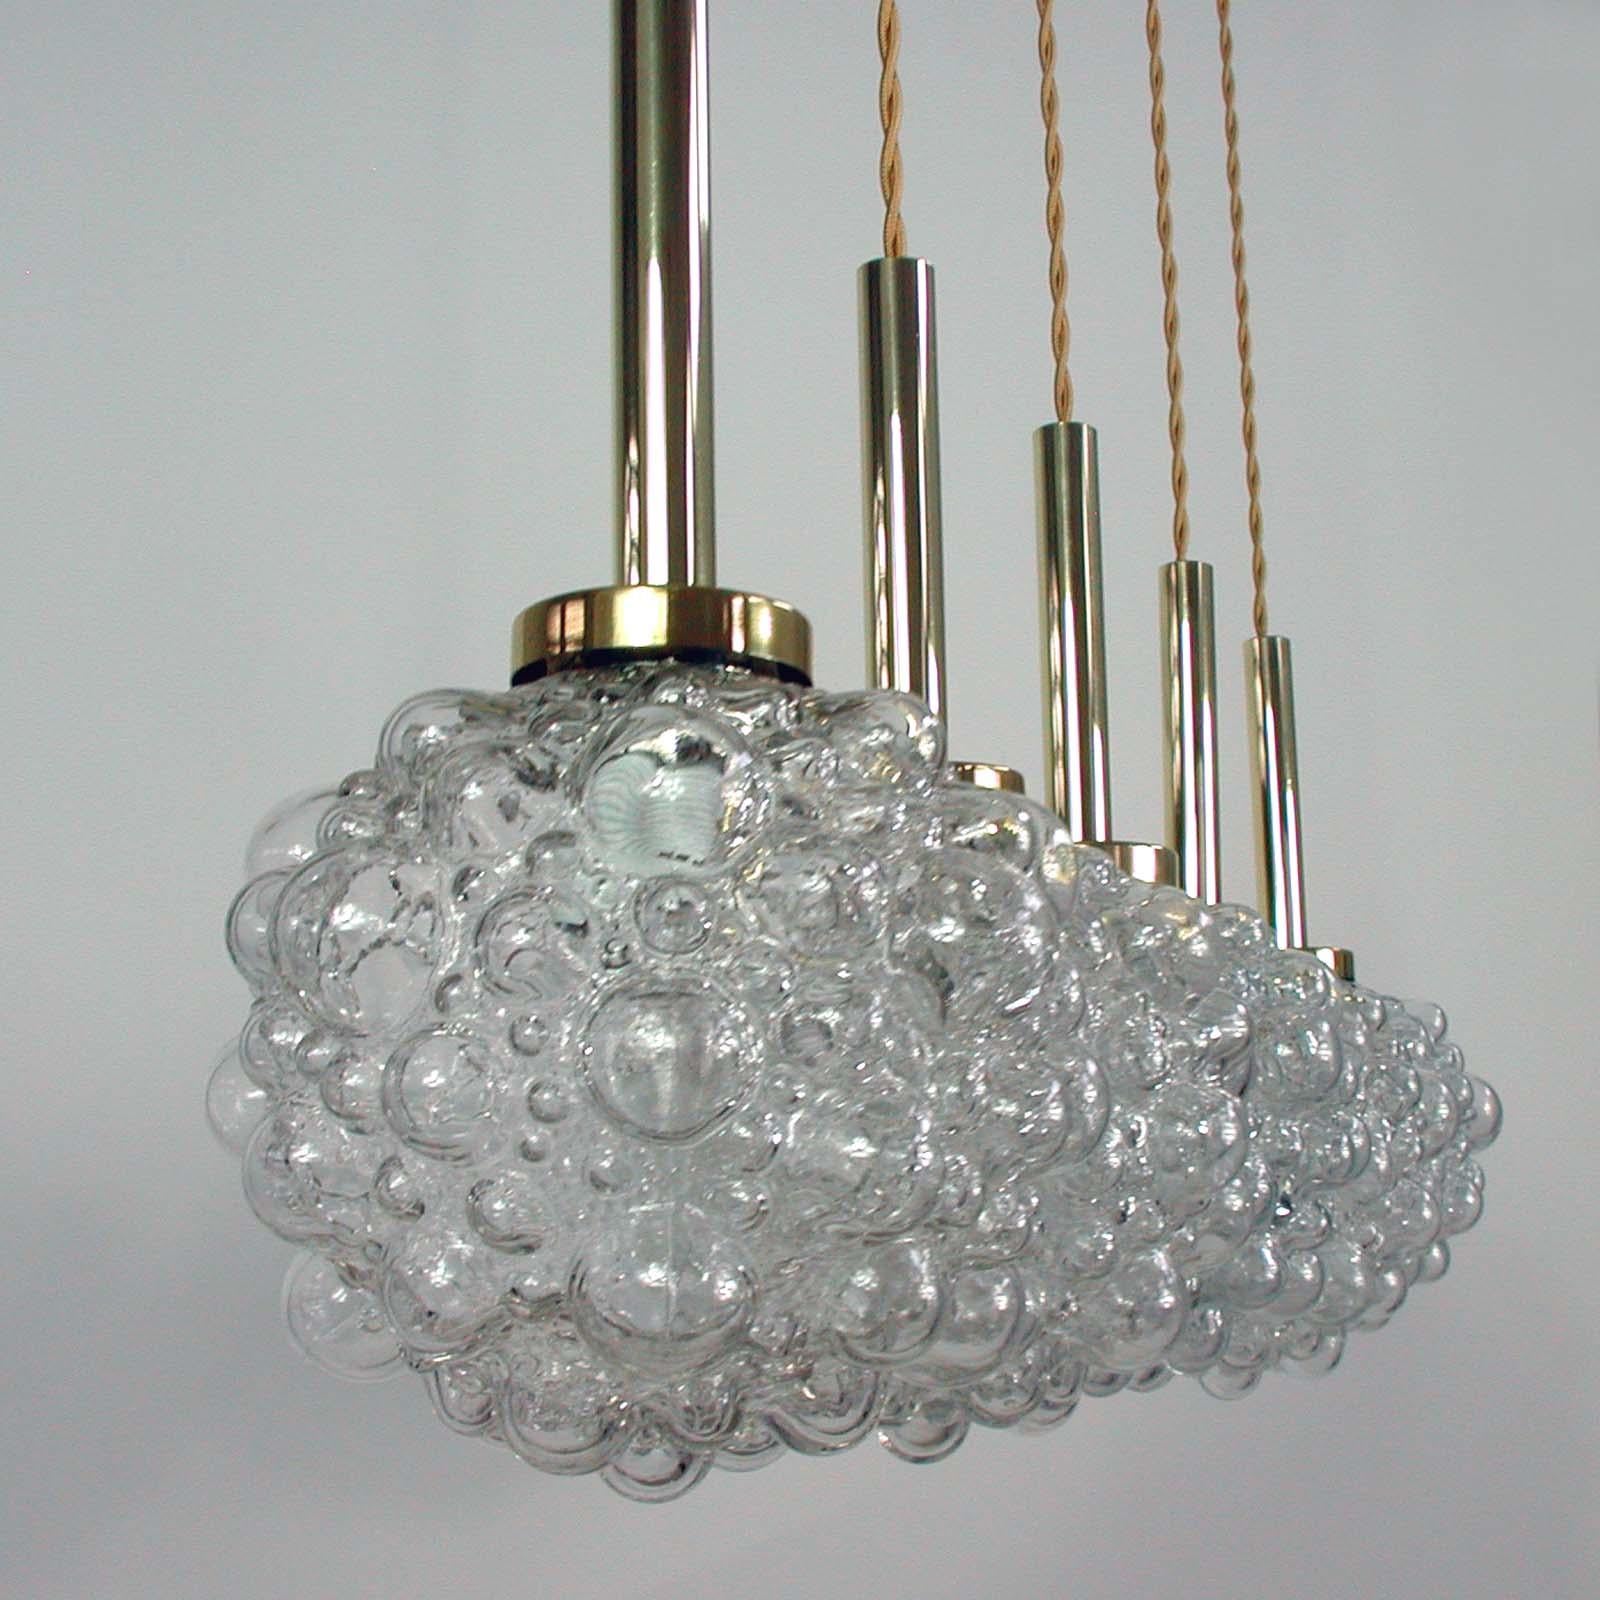 This Space Age pendant lamp was designed and manufactured in Germany in the 1960s. It is made of clear bubble glass and has got a brass top. The lamp has been rewired with new gold colored fabric cord (39.4